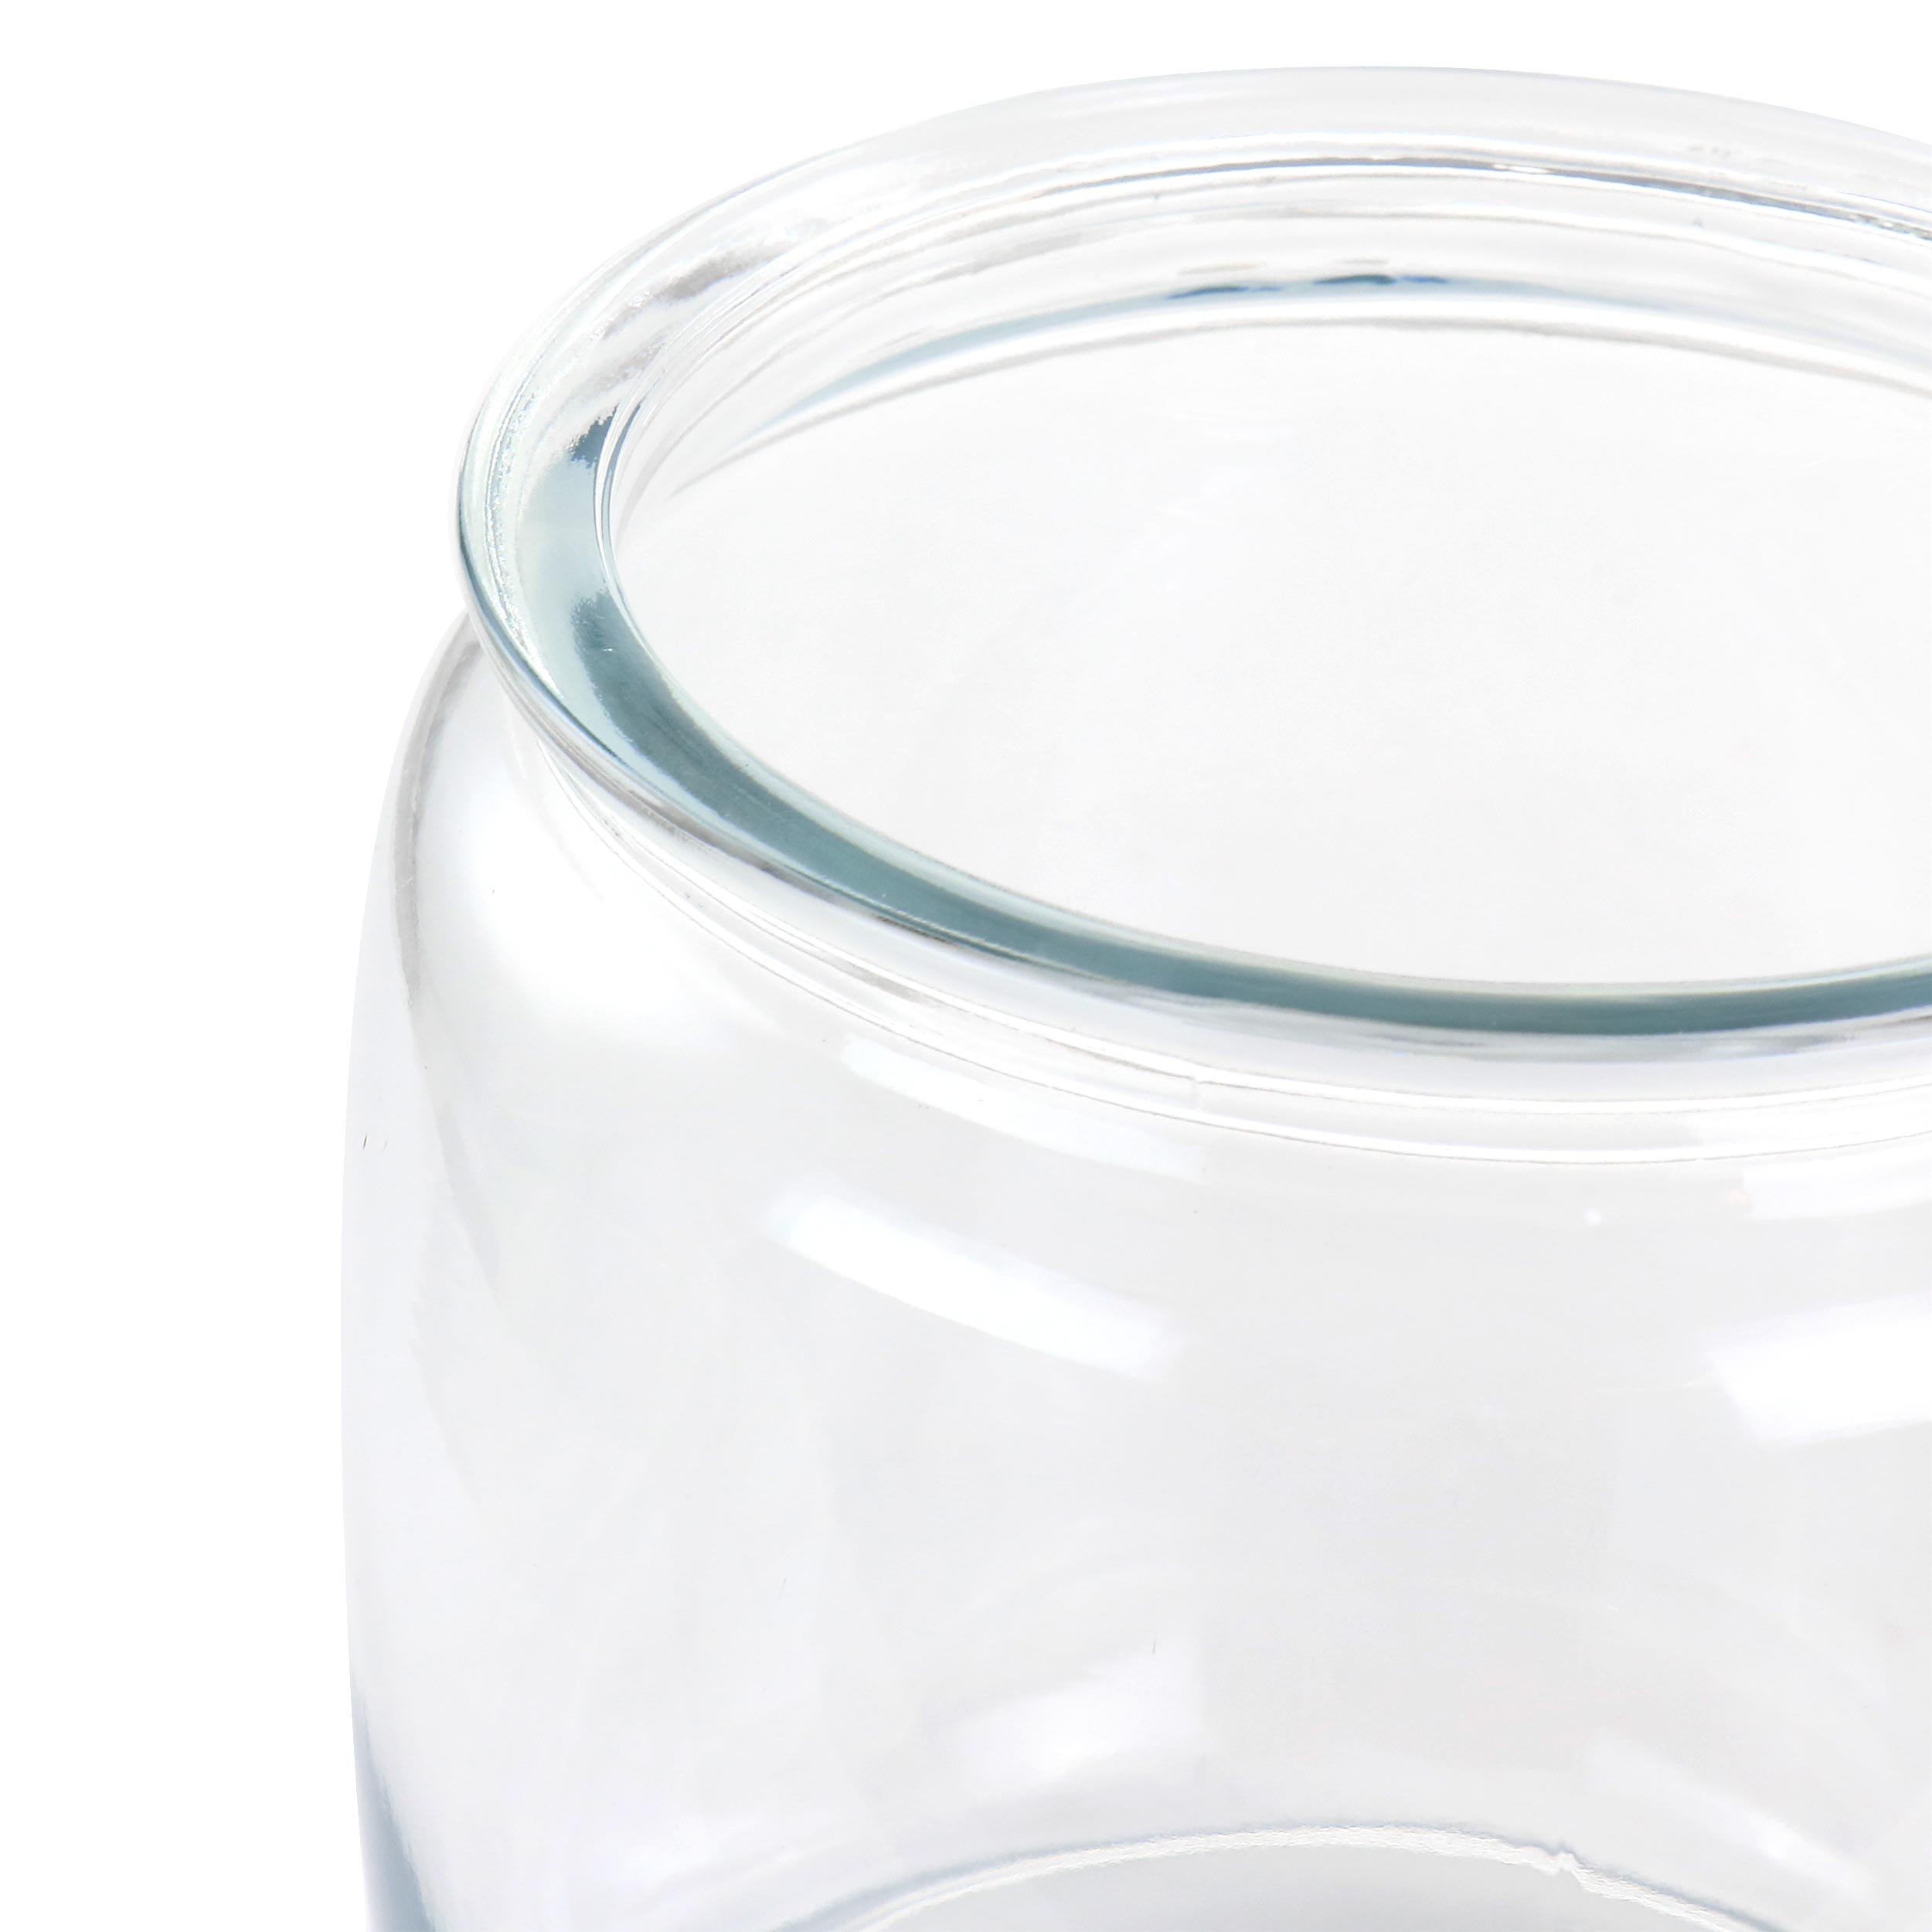 allen + roth 2-quart Glass Bpa-free Reusable Kitchen Canister with Lid in  the Food Storage Containers department at